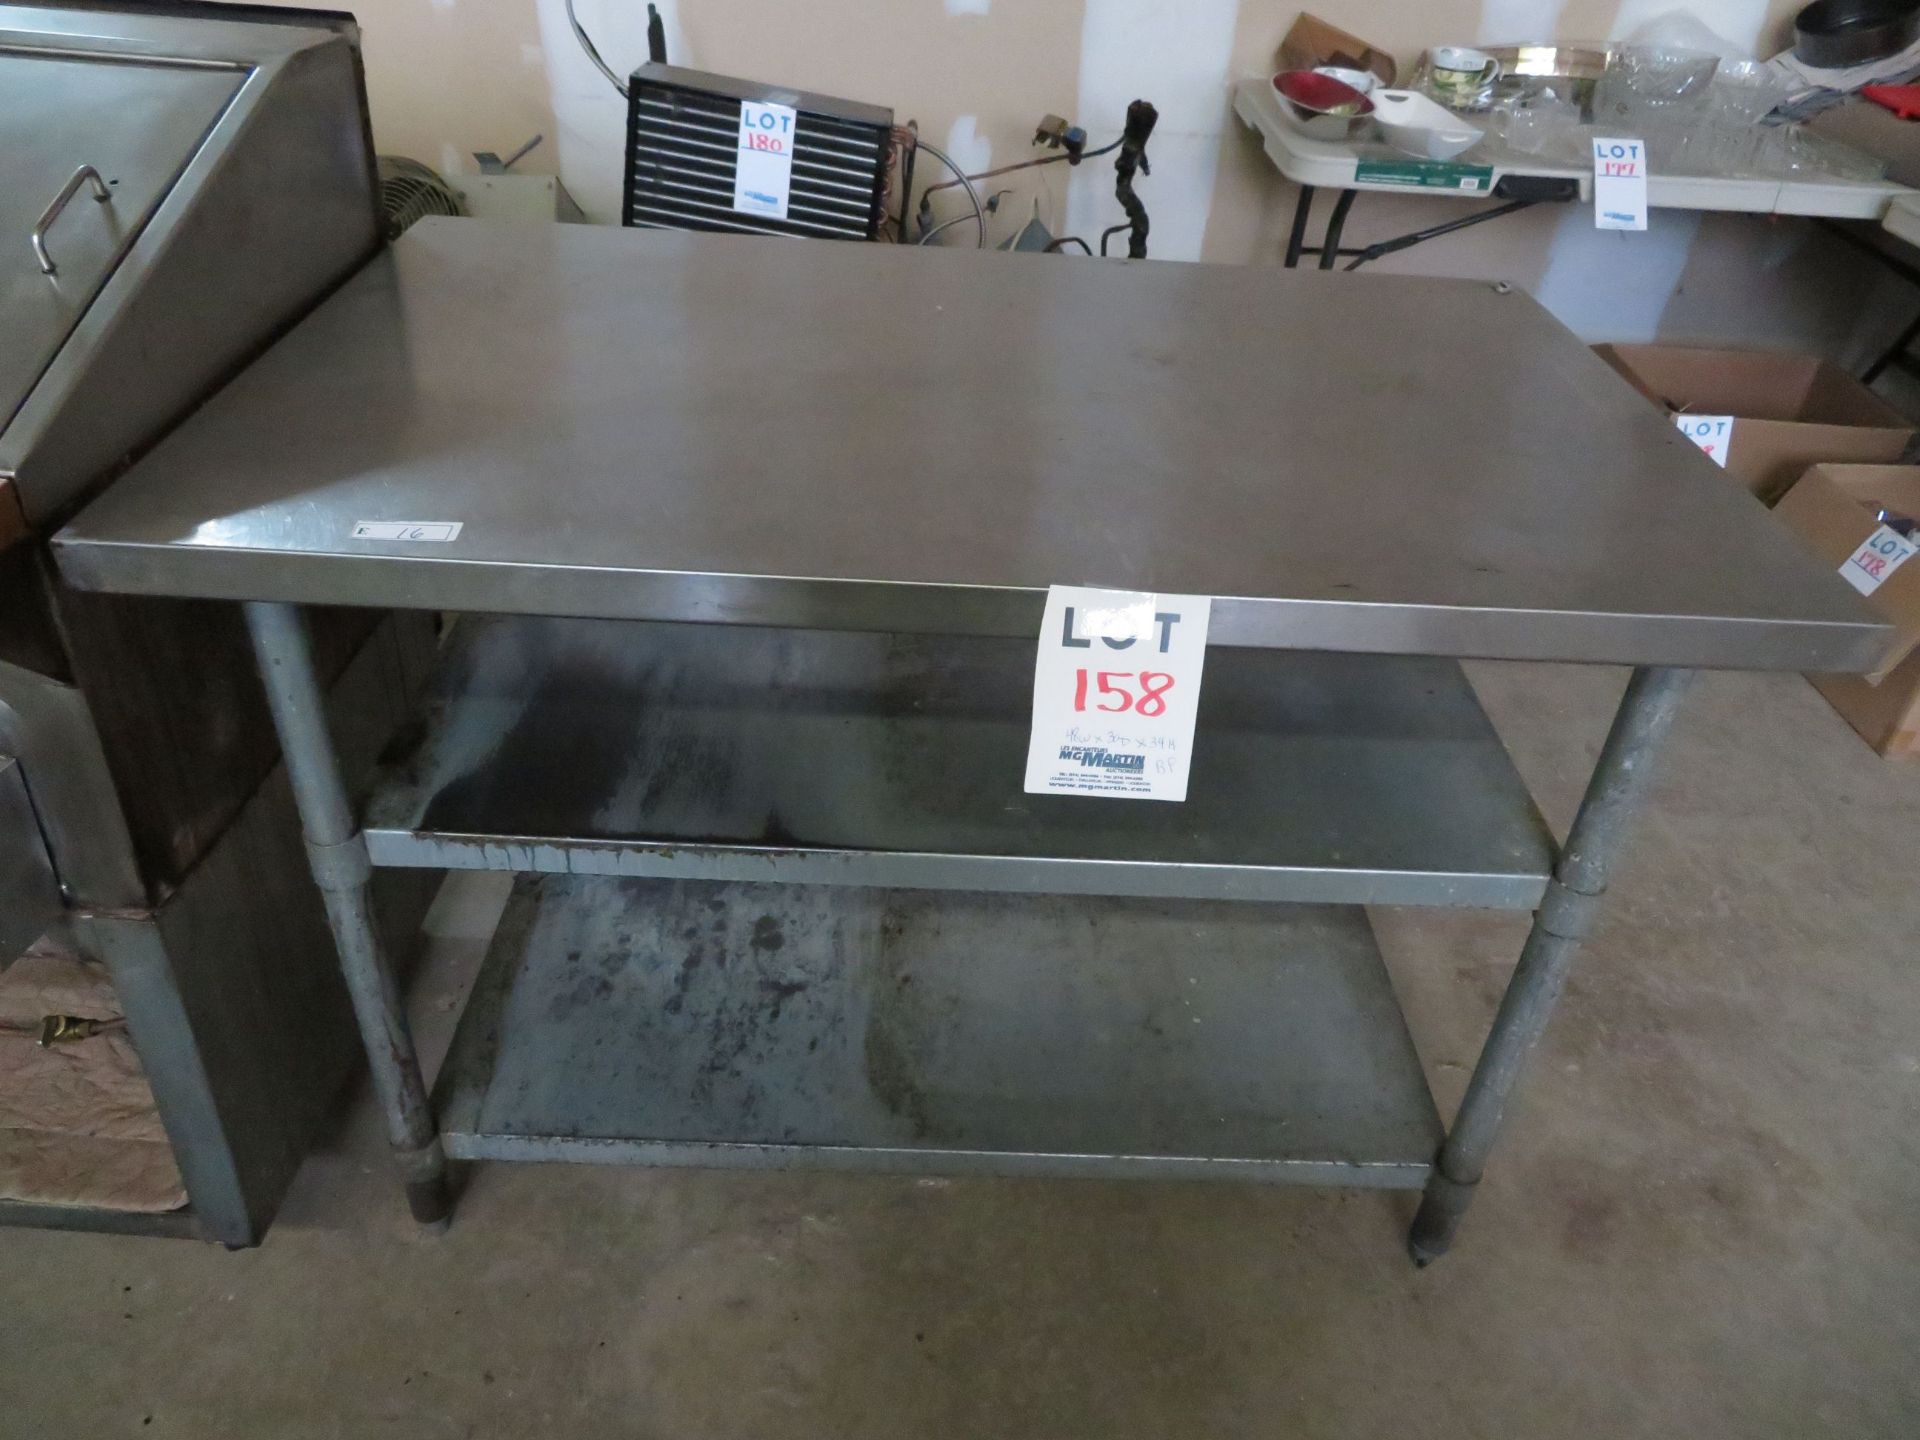 Stainless steel table top table approx. 48"w x 30"d x 34"h